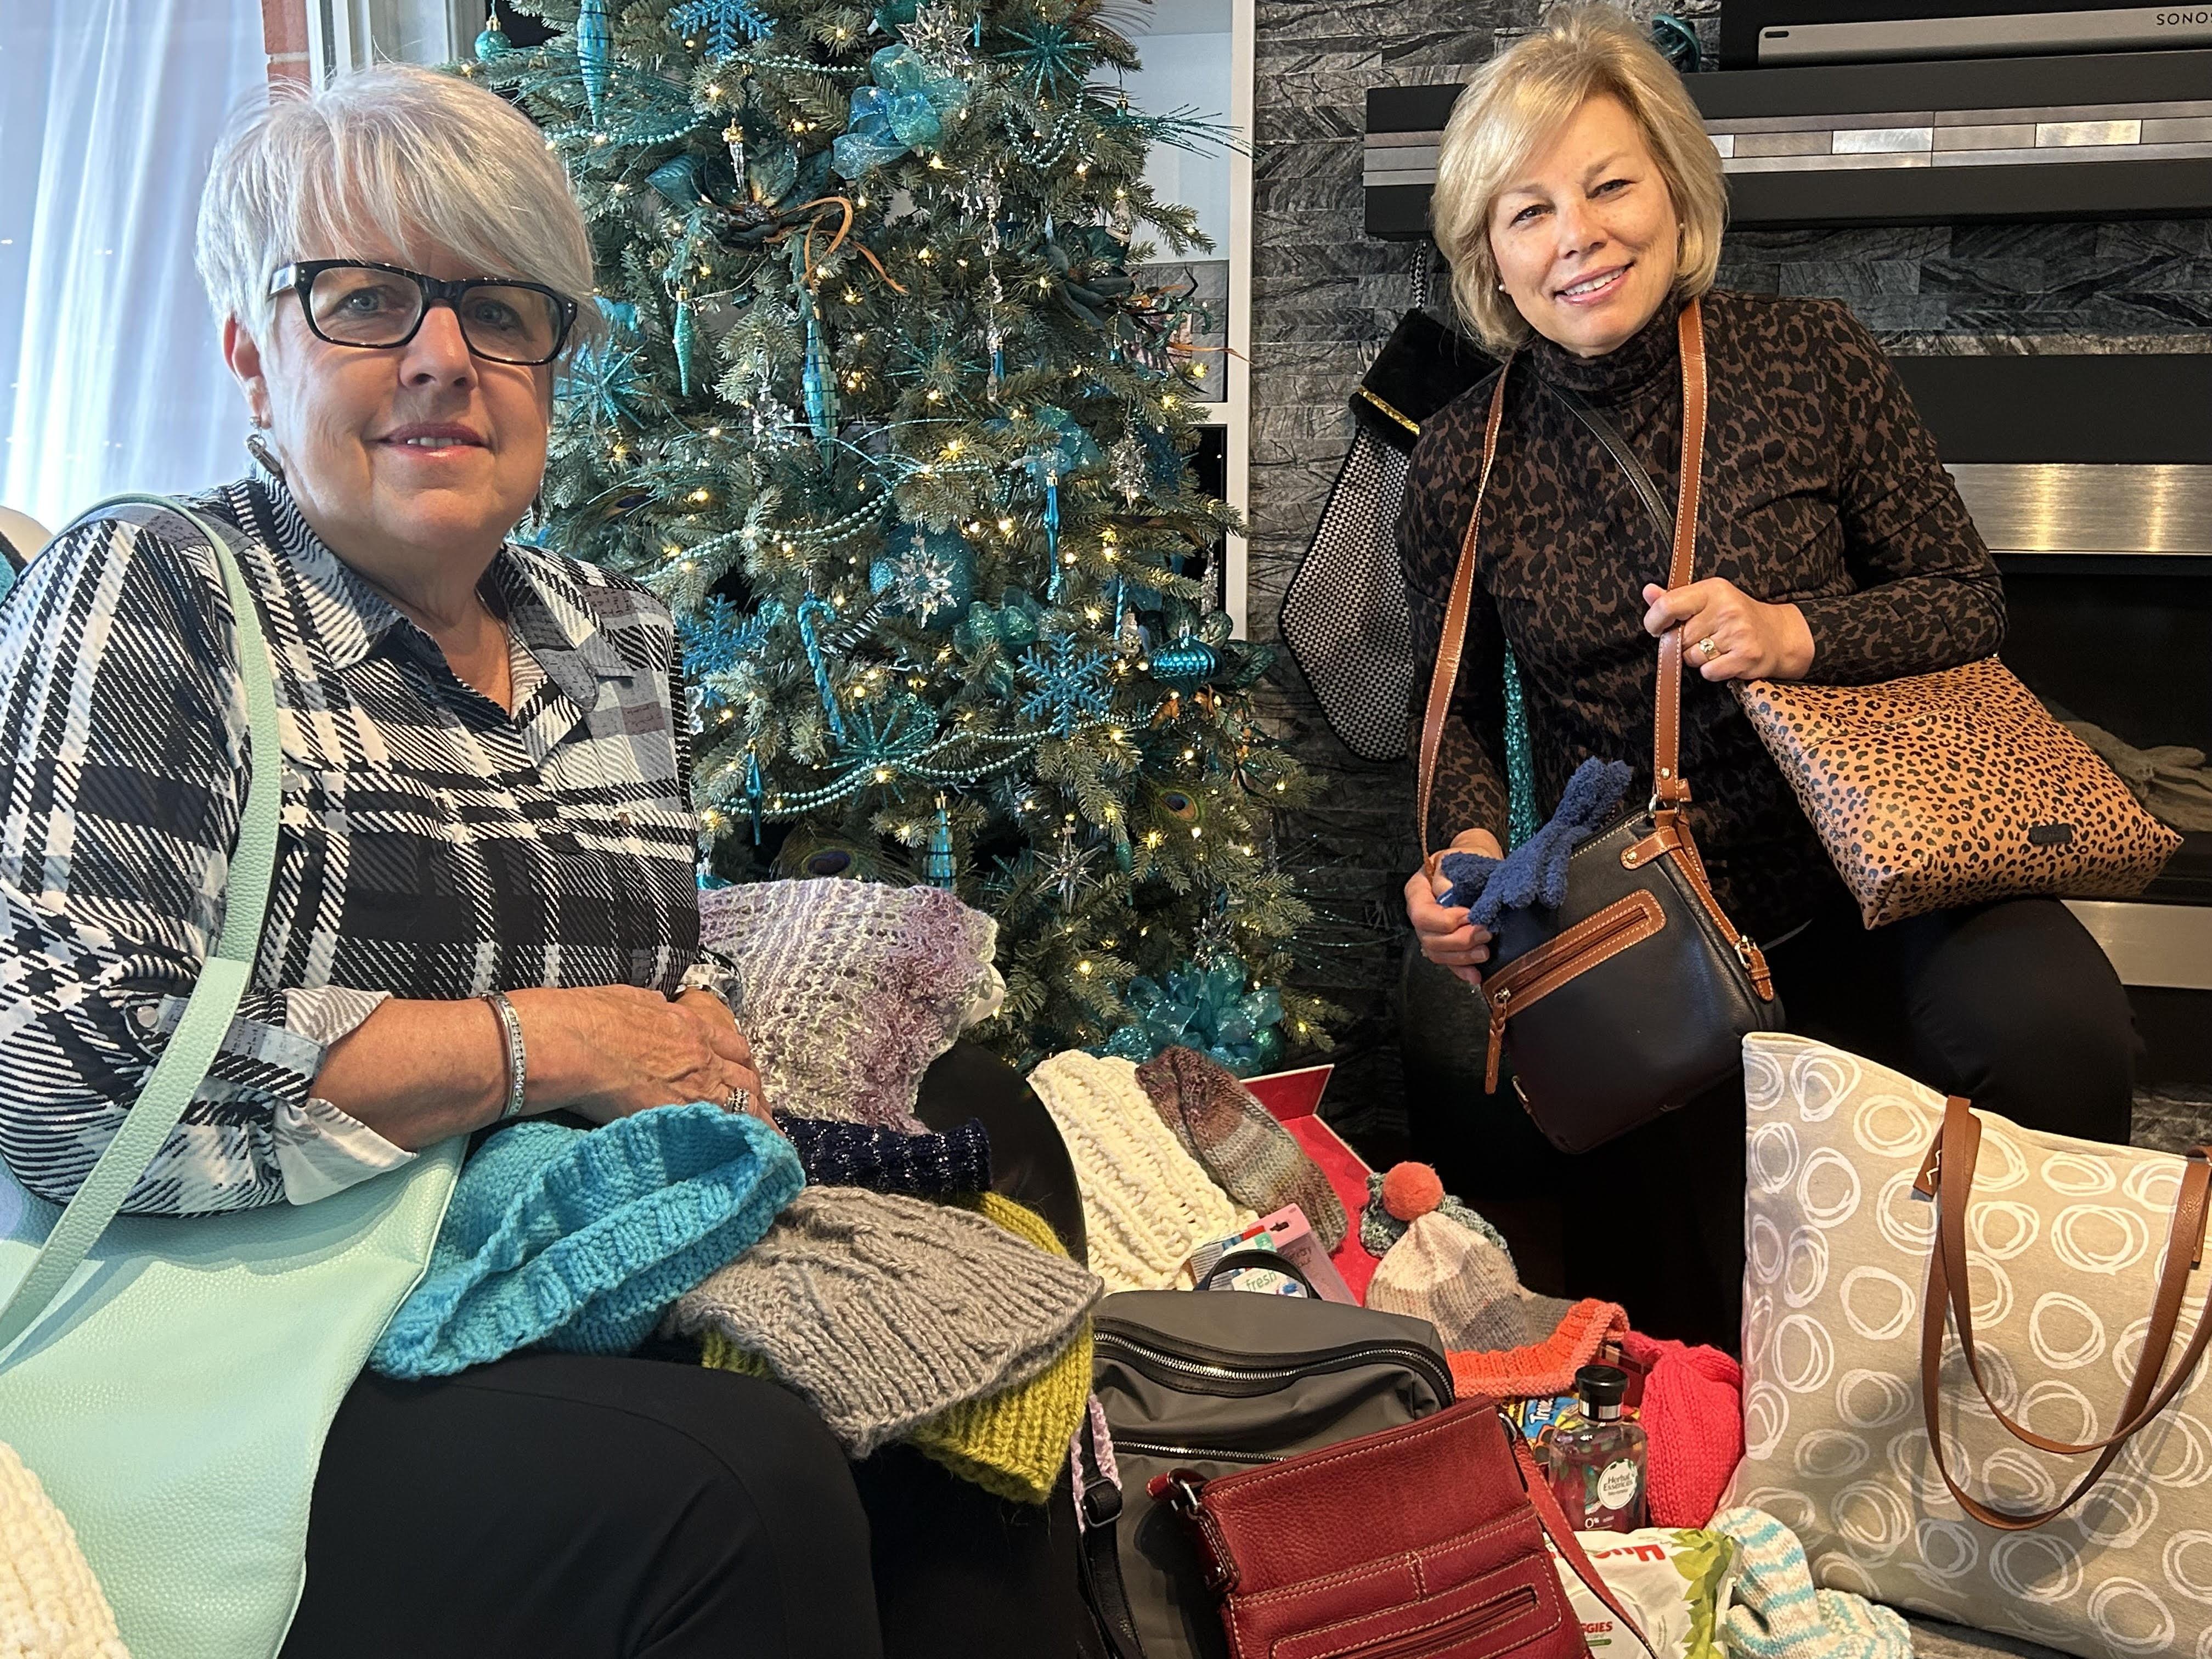 Fill A Purse for a Sister helps women, one handbag at a time